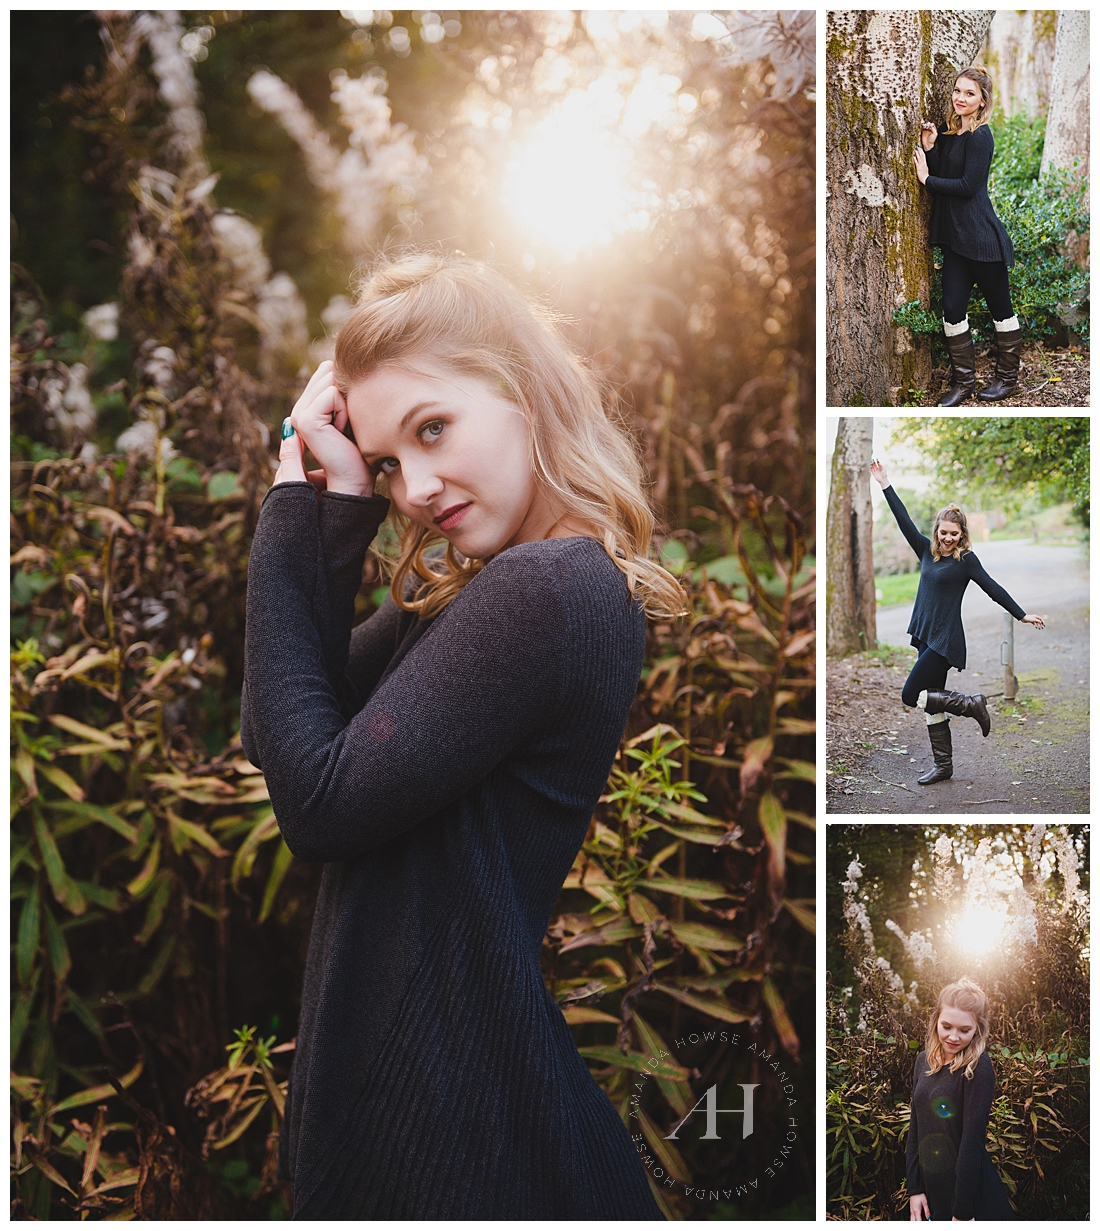 Fall Senior Portrait Session in a Garden with Gorgeous Light Photographed by Tacoma Senior Photographer Amanda Howse